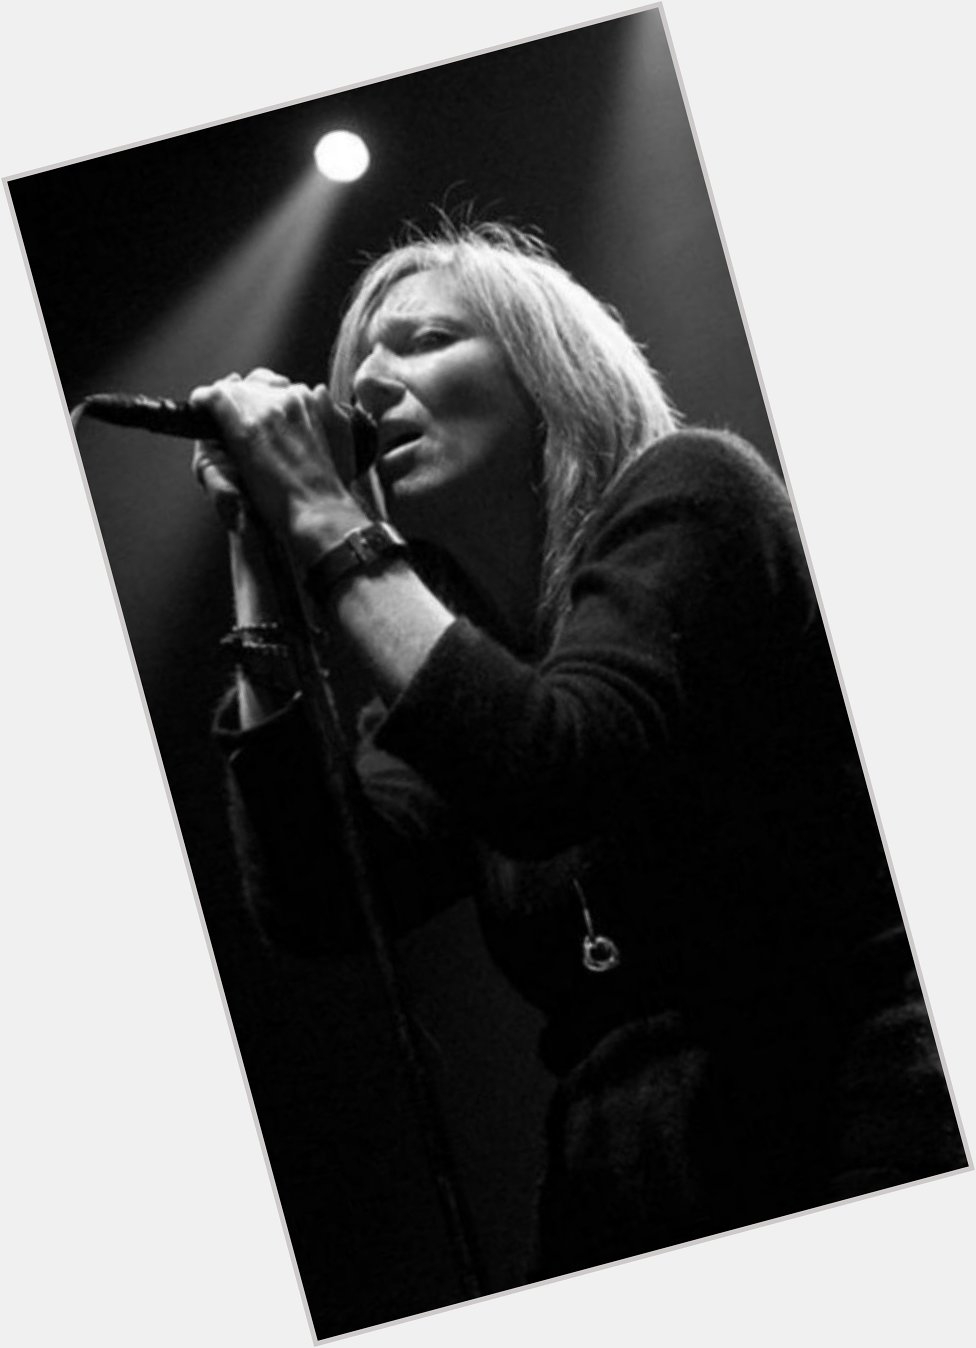 Happy 58th birthday to an absolute goddess of vocals, Beth Gibbons of Portishead. 